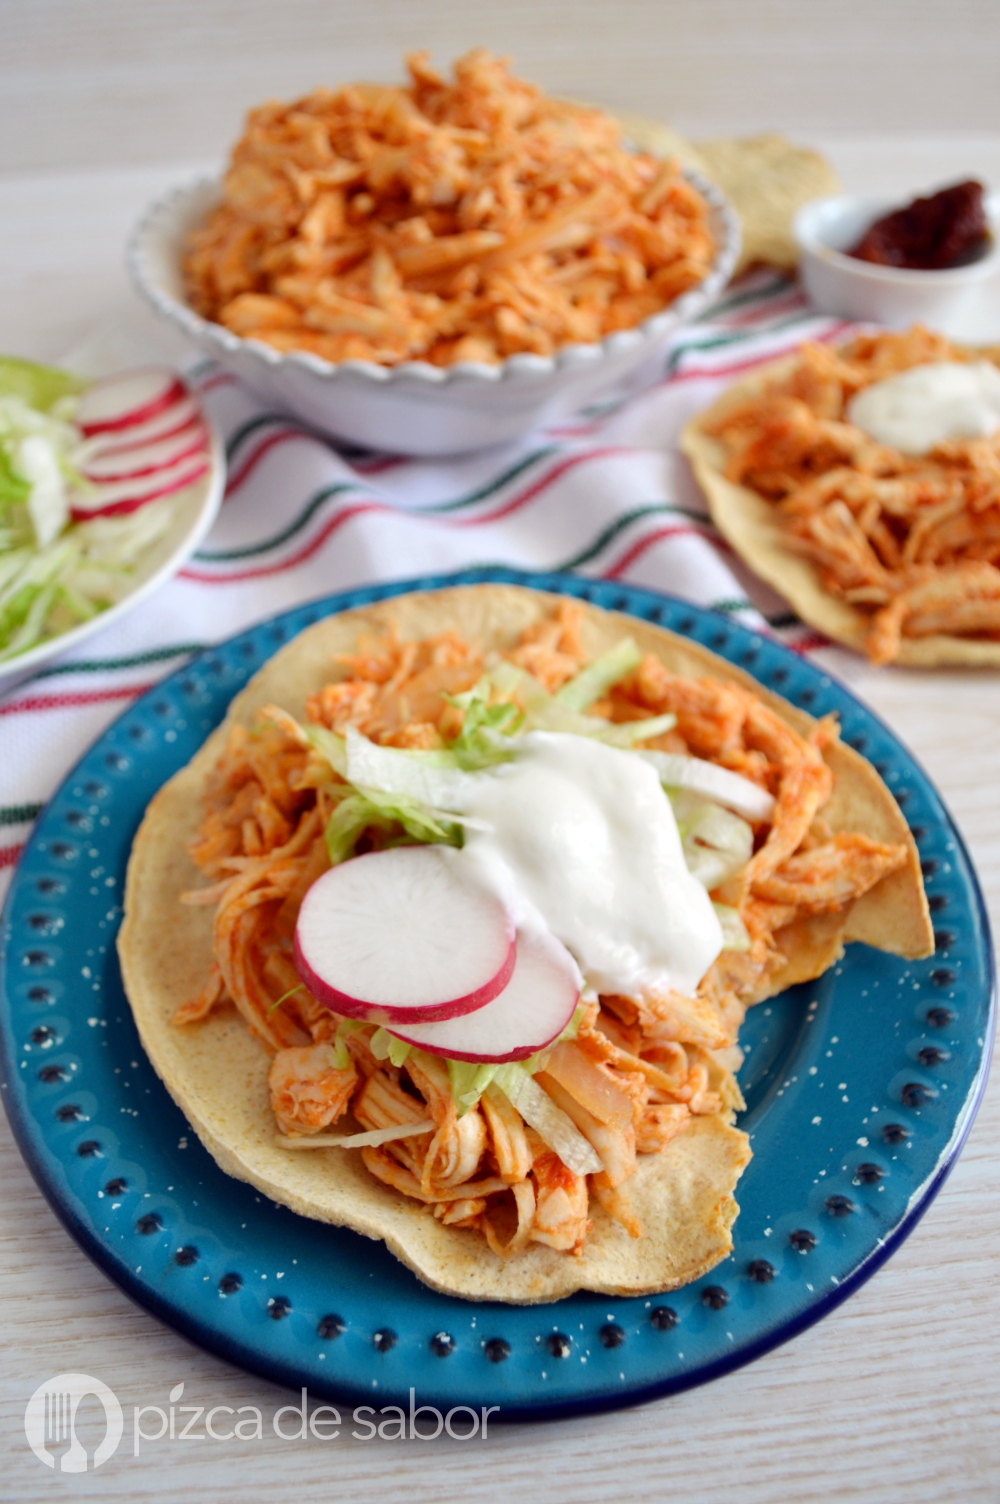 Chicken tinga or chicken in chipotle sauce www.thebestmexicanrecipes.com